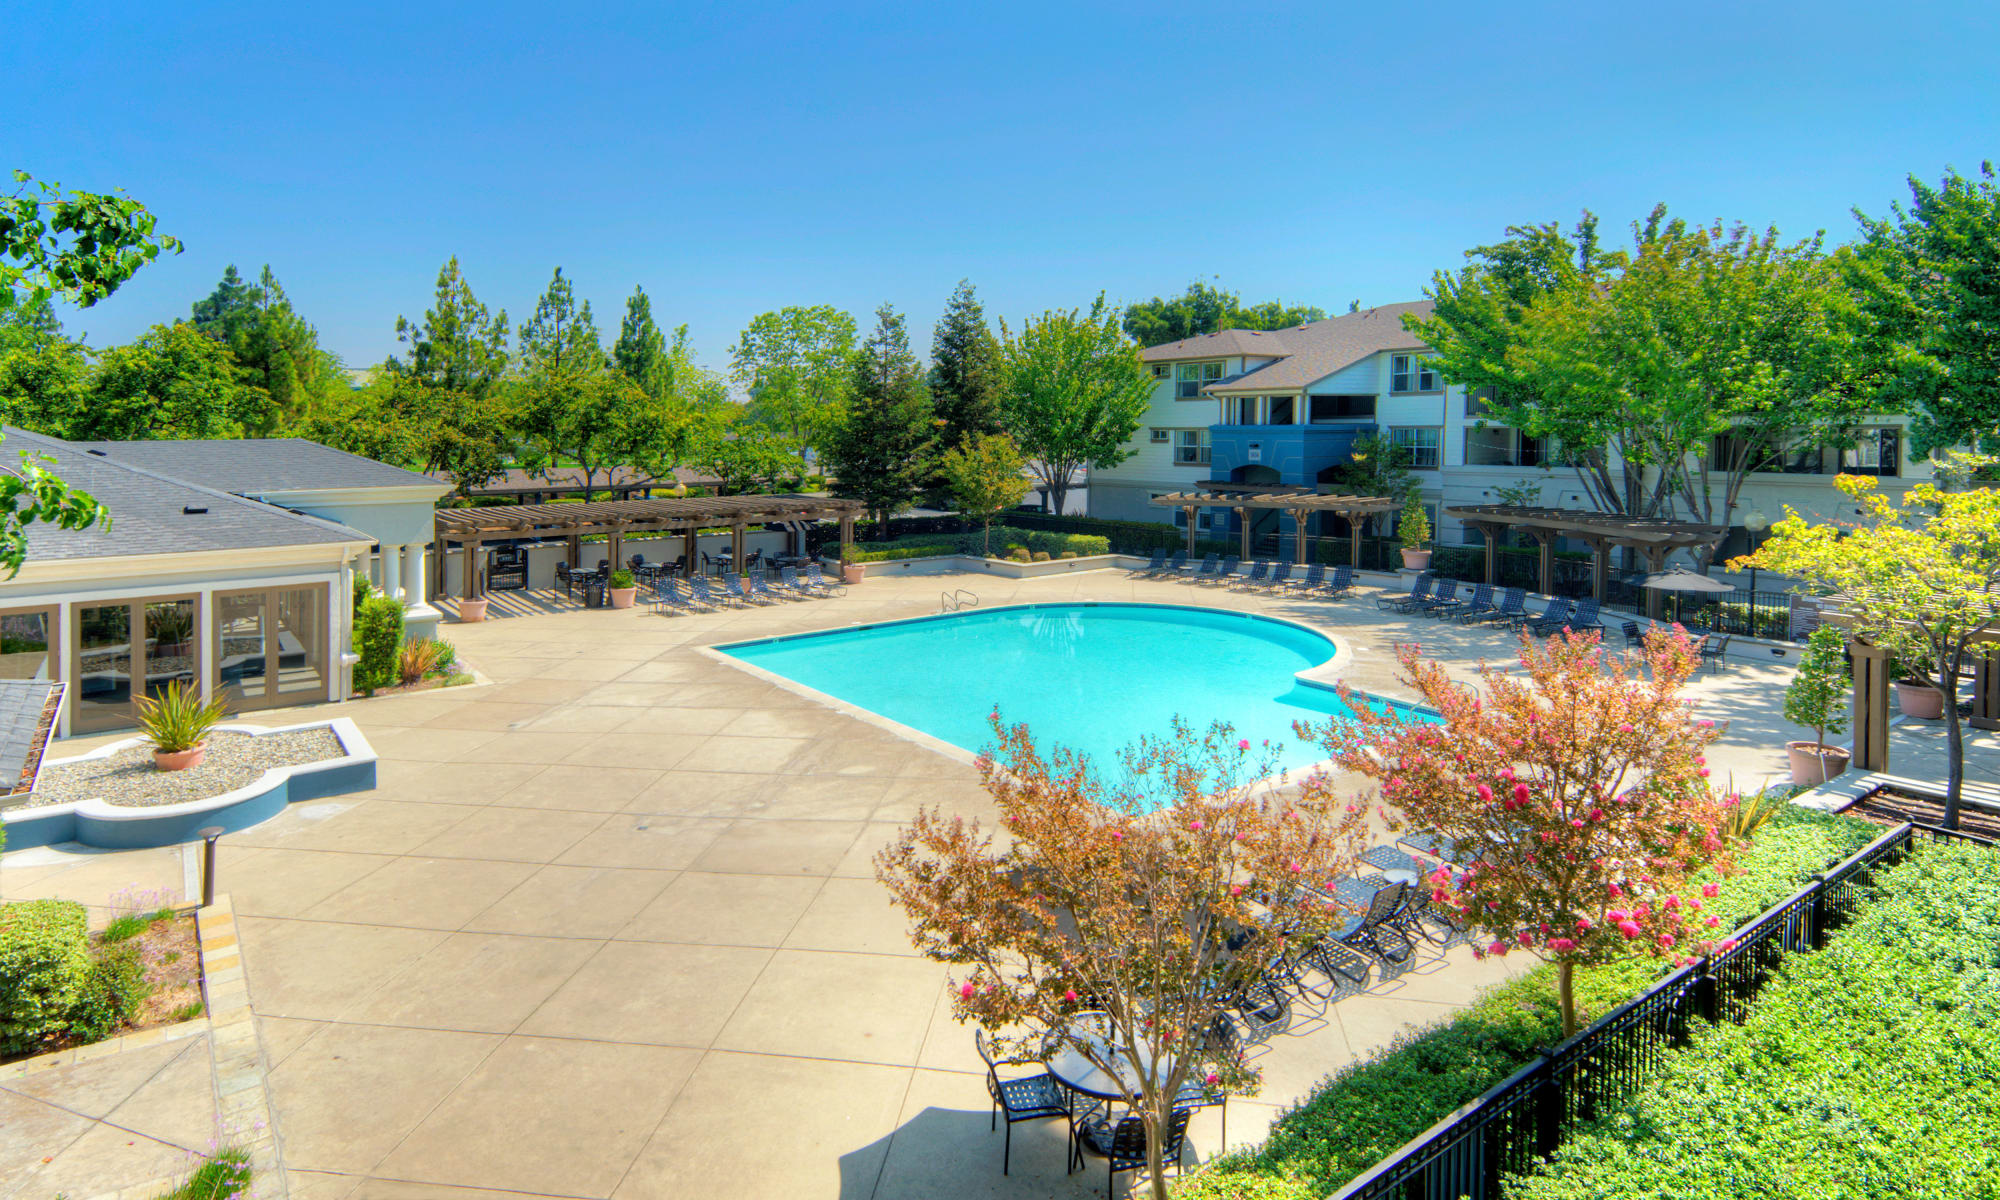 Photos of Amber Court in Fremont, California